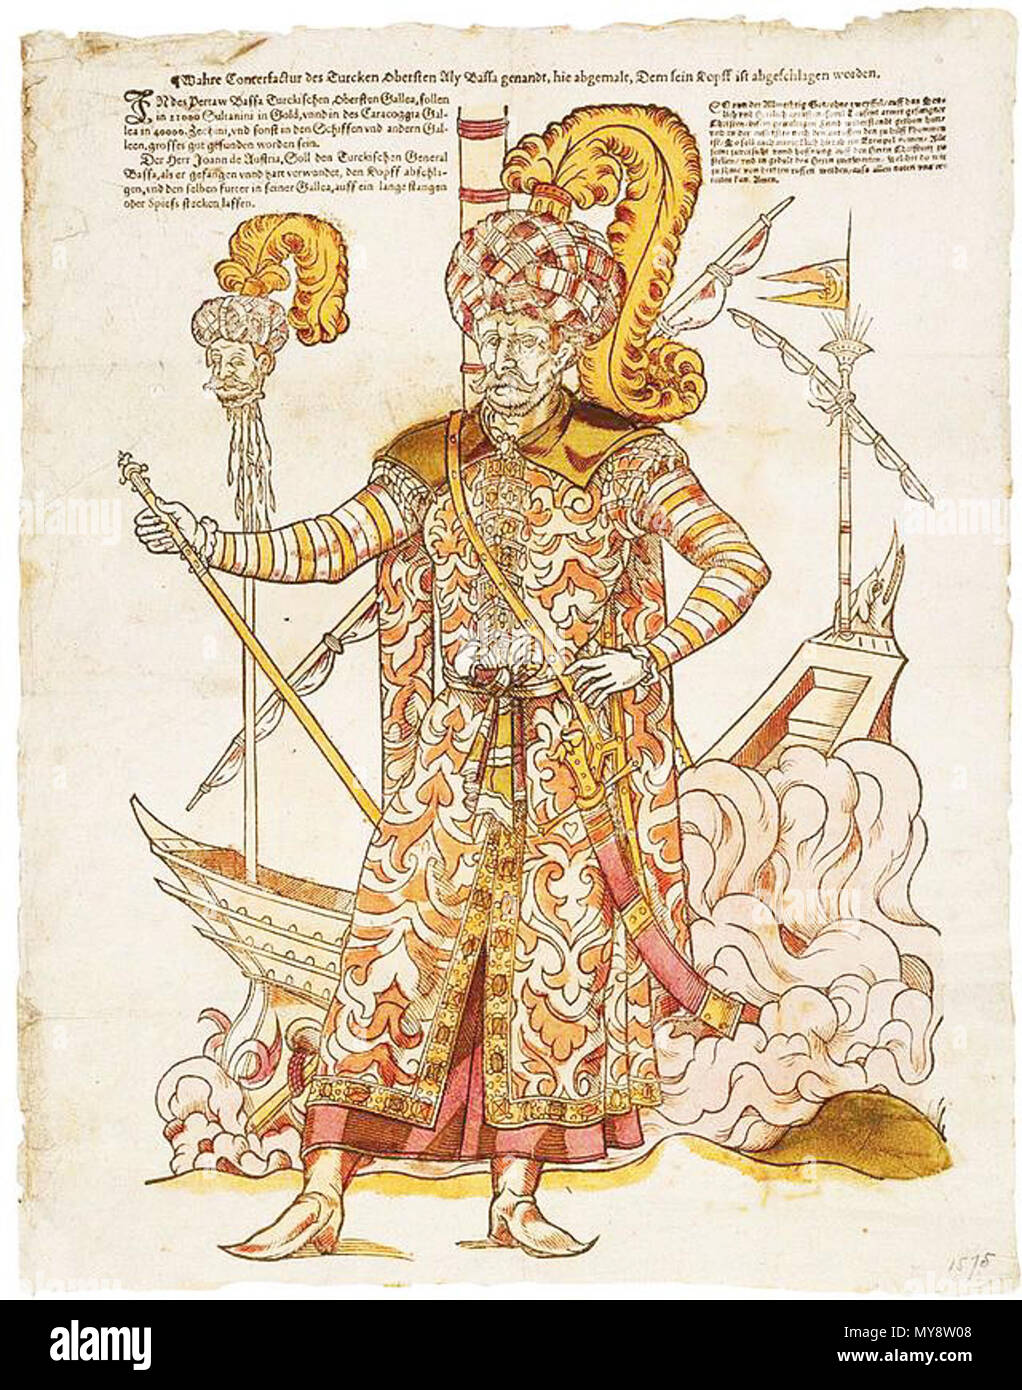 . (ostensibly) Müezzinzade Ali Pasha, the Turkish commander at the Battle of Lepanto. Anonymous German broadsheet, c. 1571. Woodcut with stencil and hand colouring on laid paper with letterpress. 'Müezzinzade Ali Pasha is shown full length, wearing a kaftan of costly woven, figured silks. His exotic clothes, turban and long feathery headdress denote his high rank. Although he is shown alive, in the background is a detail of his head on the end of a pole. Behind Ali Pasha is the Turkish (Ottoman) flagship on which he was wounded and subsequently beheaded.' . This file is lacking author informat Stock Photo